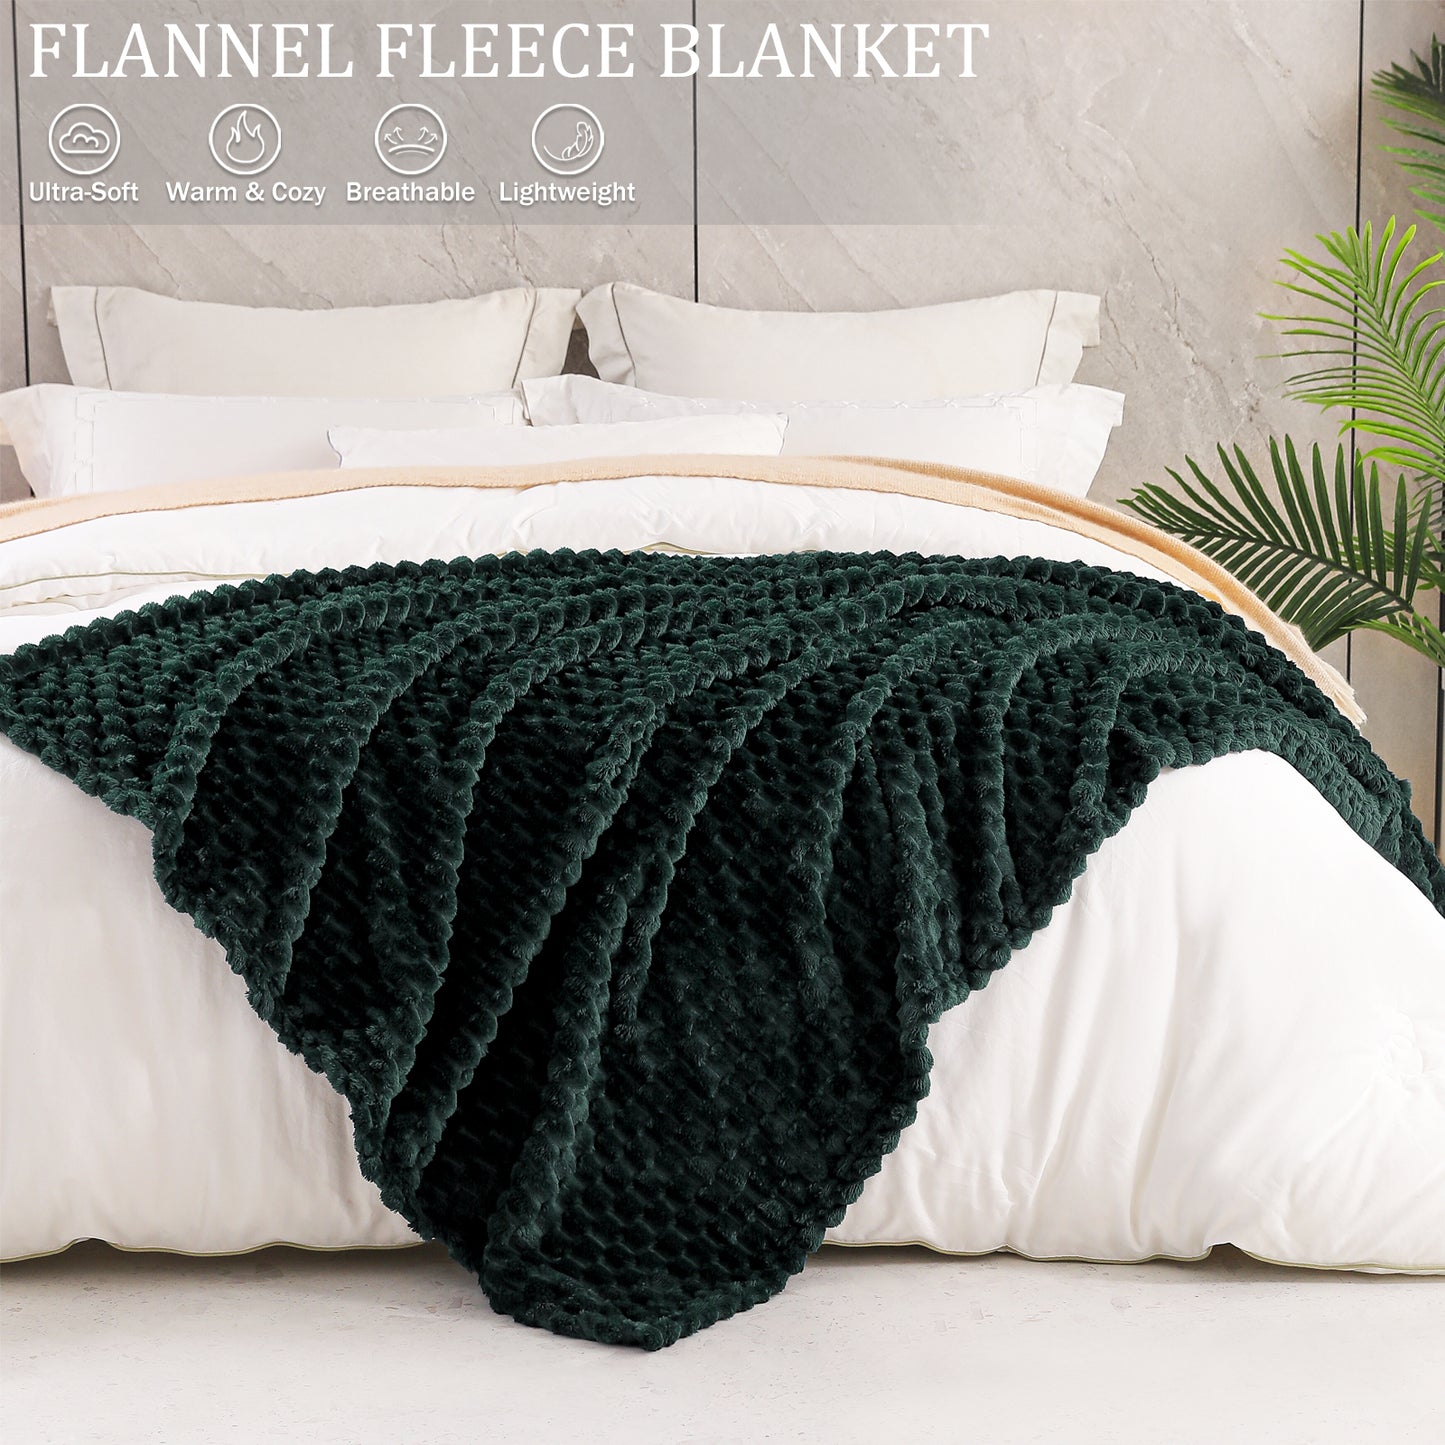 Exclusivo Mezcla Large Soft Fleece Throw Blanket, 50x70 Inches Stylish Jacquard Throw Blanket for Couch, Cozy, Warm, Lightweight and Decorative Forest Green Blanket